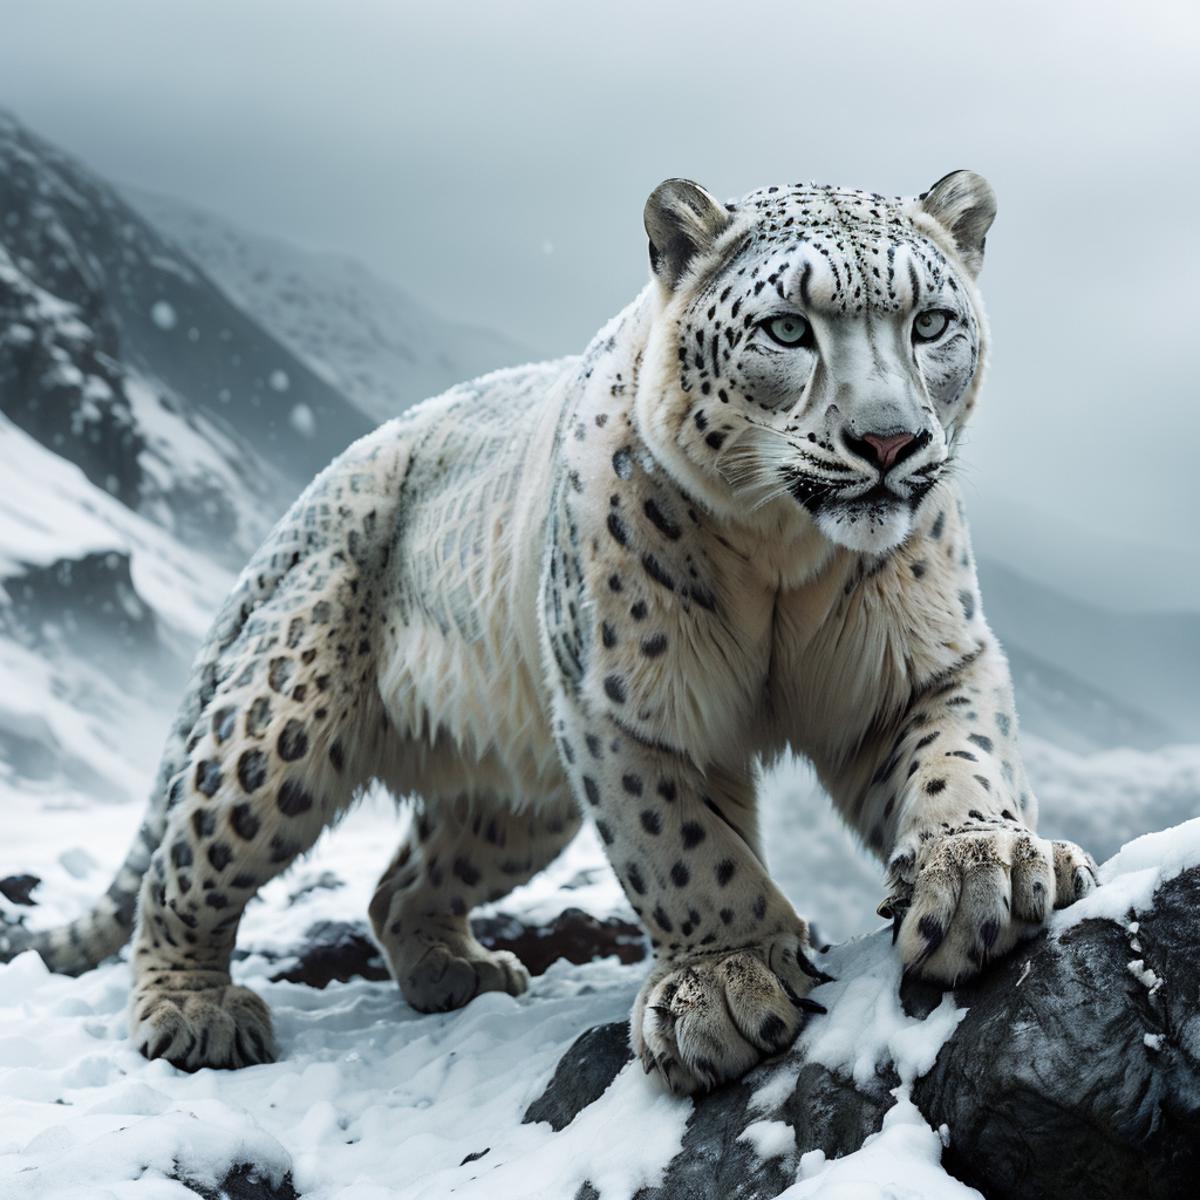 RPGSnowLeopard image by ashrpg